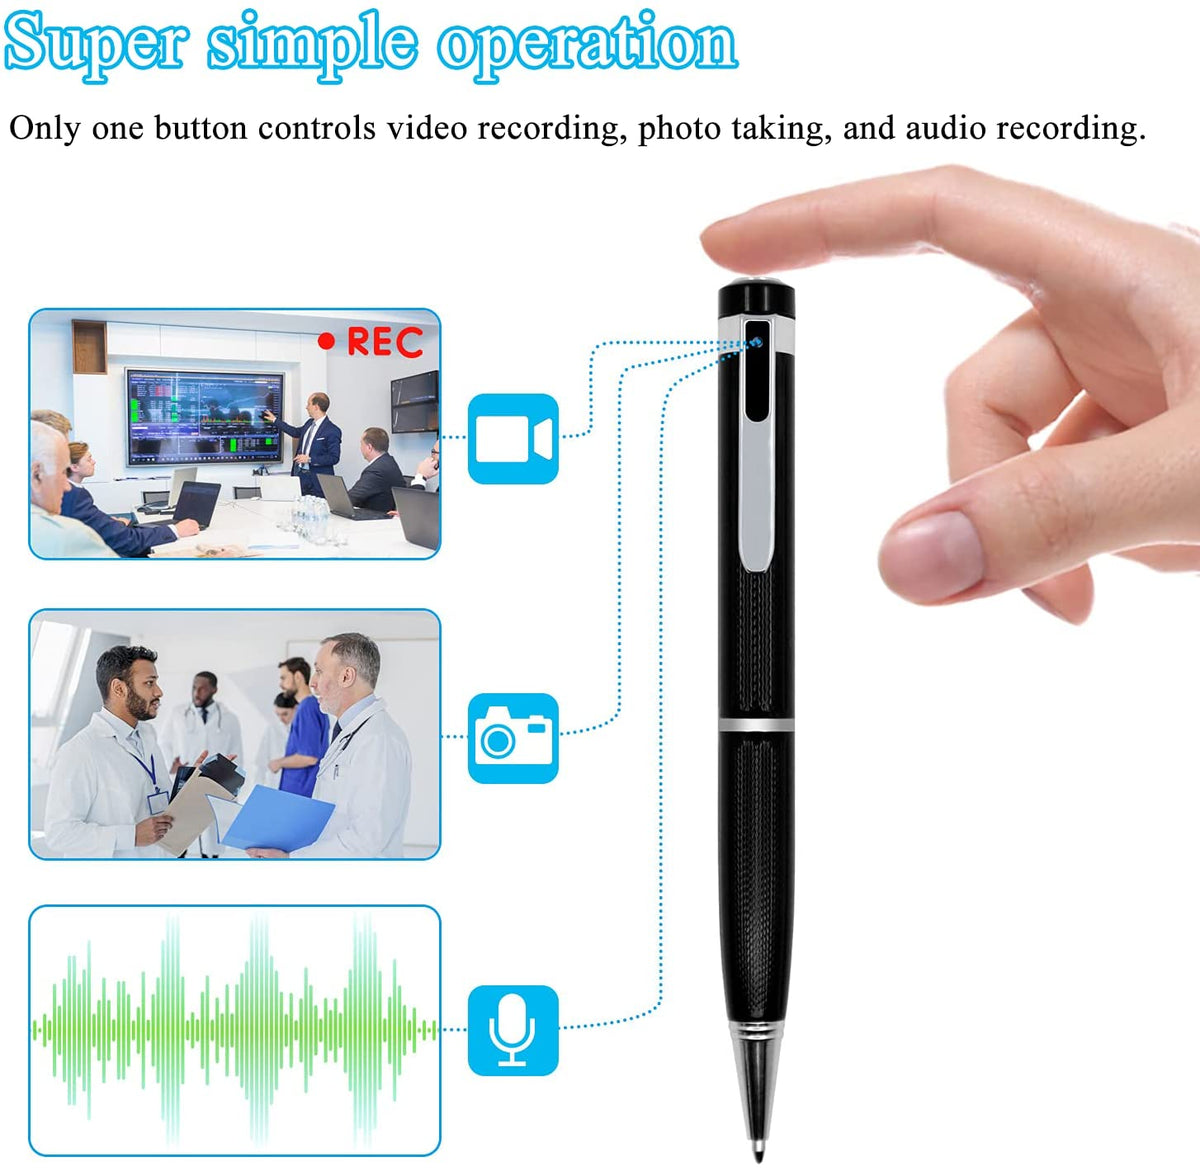 Kaleser 1080P HD Pen Camera Video with 32GB Memory Card for Home and Office Security, Mini Pen Camera